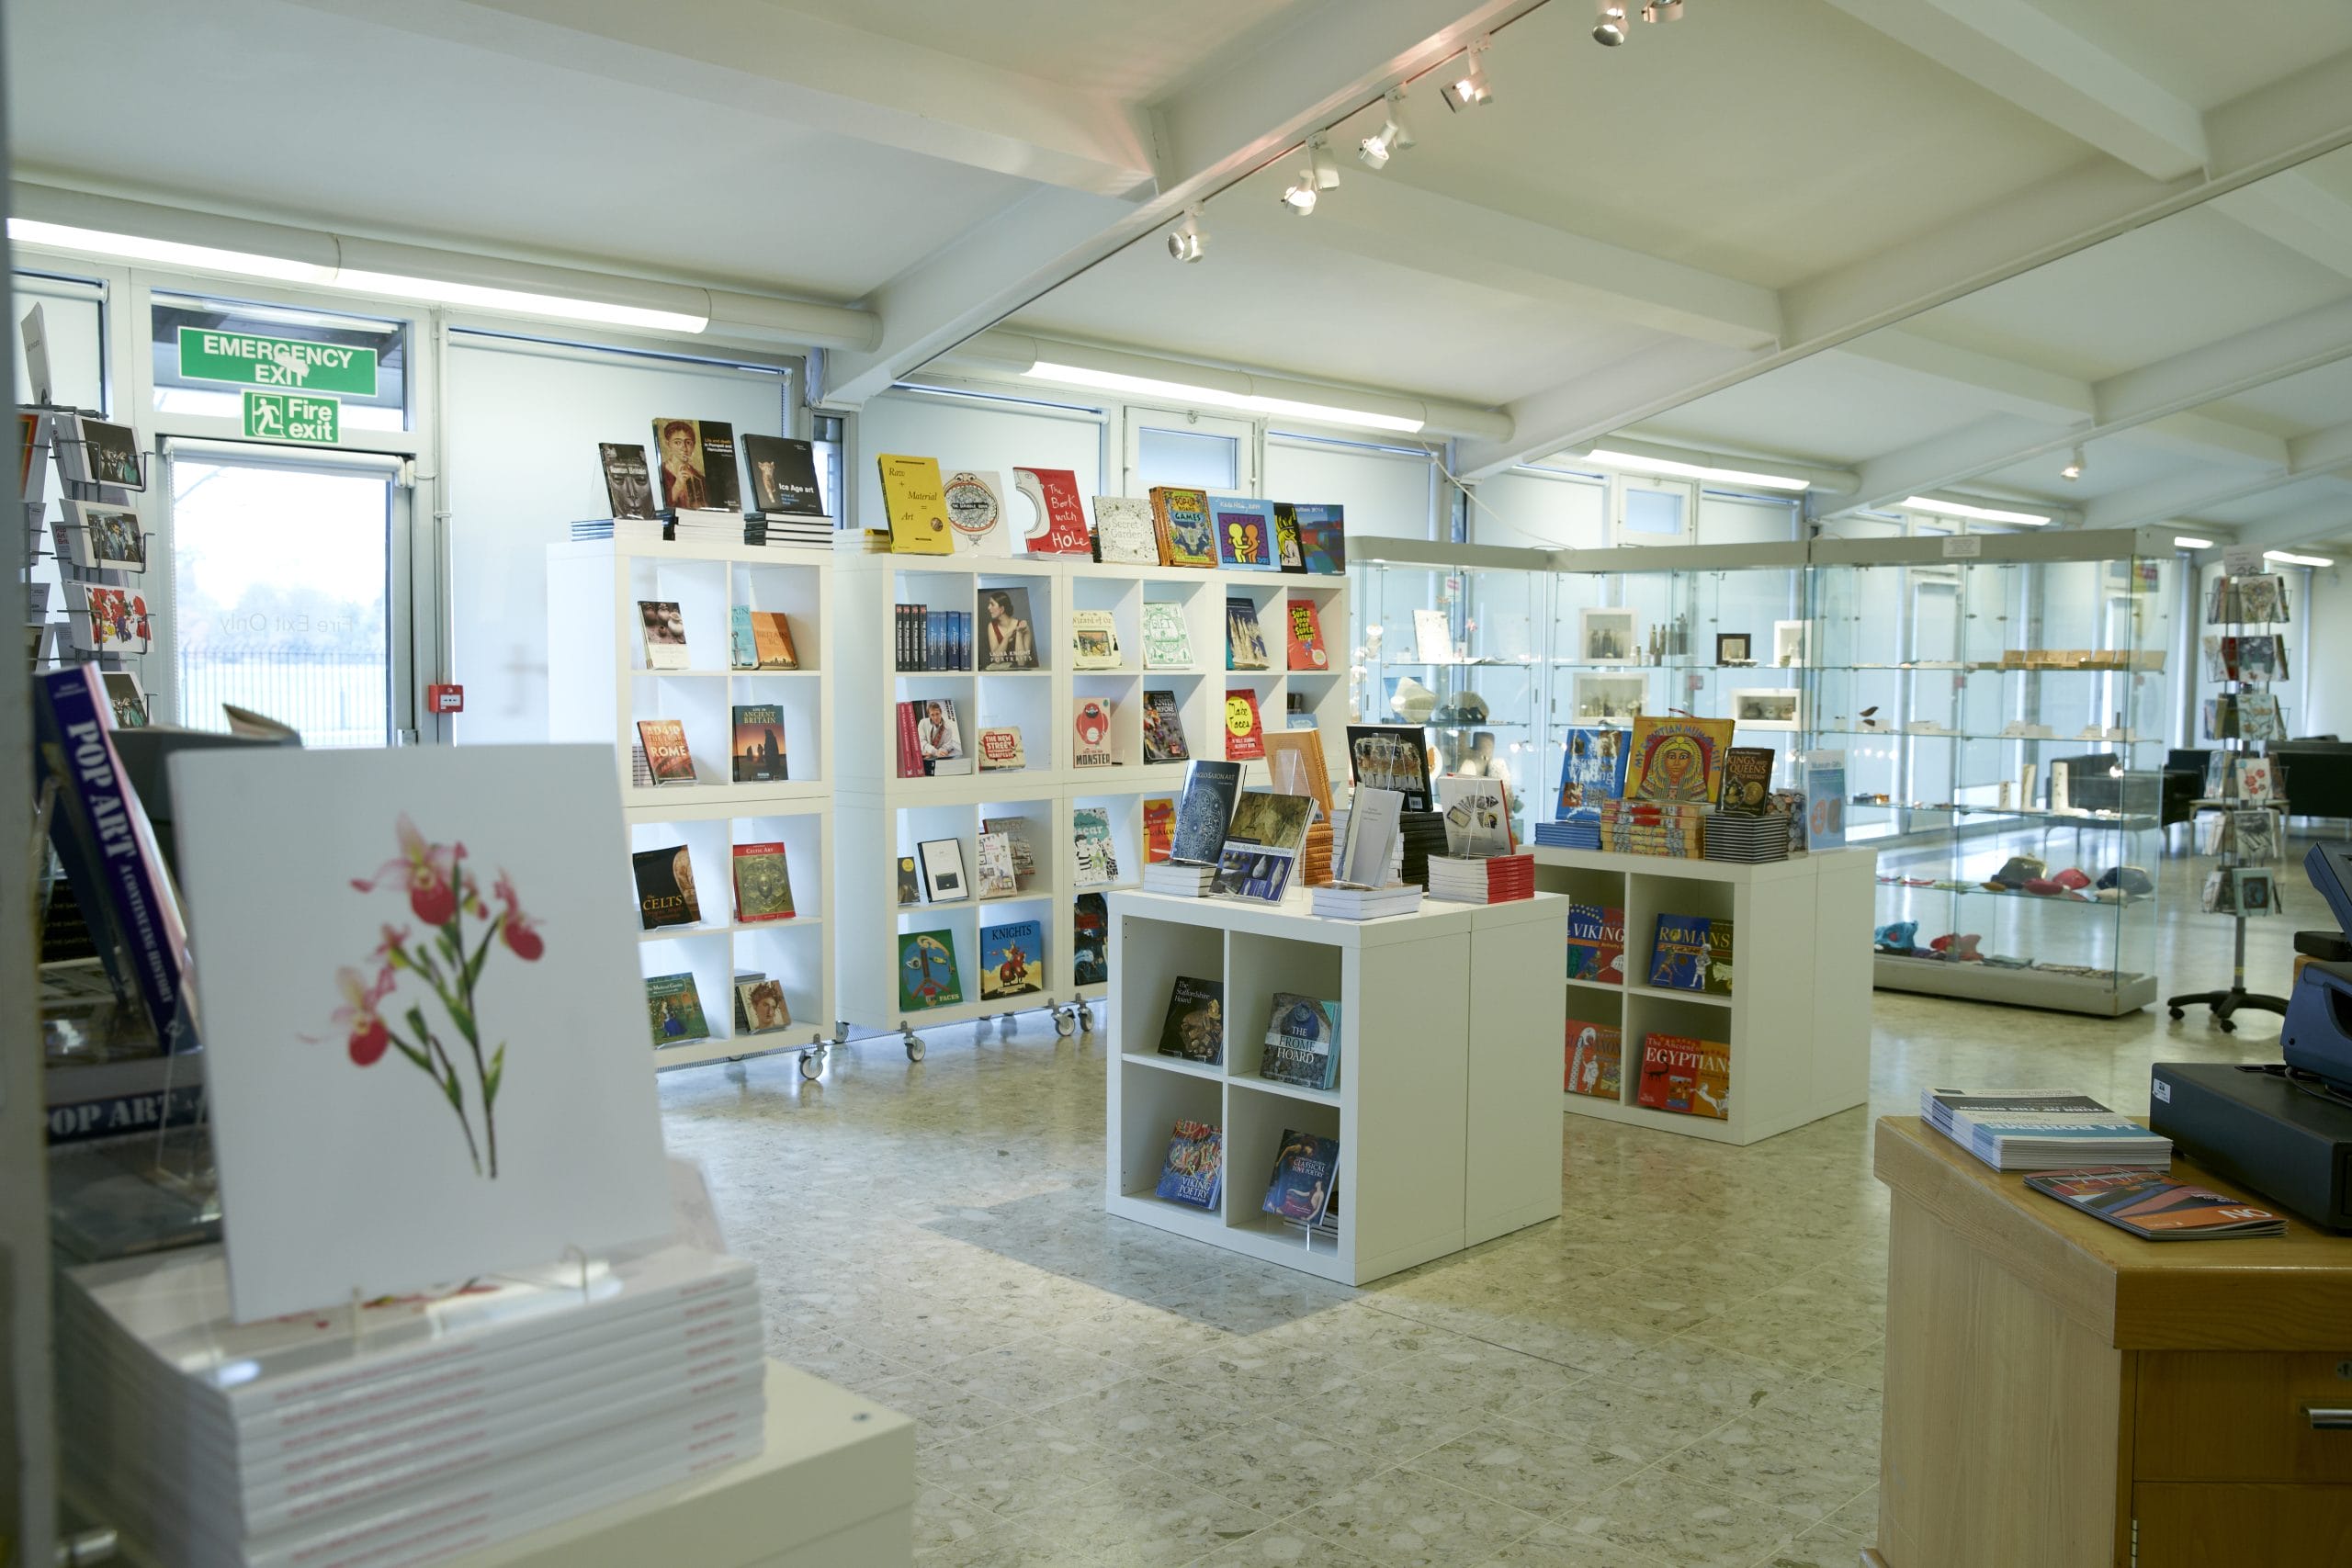 A light bright shop space with square shelves and colourful displays.